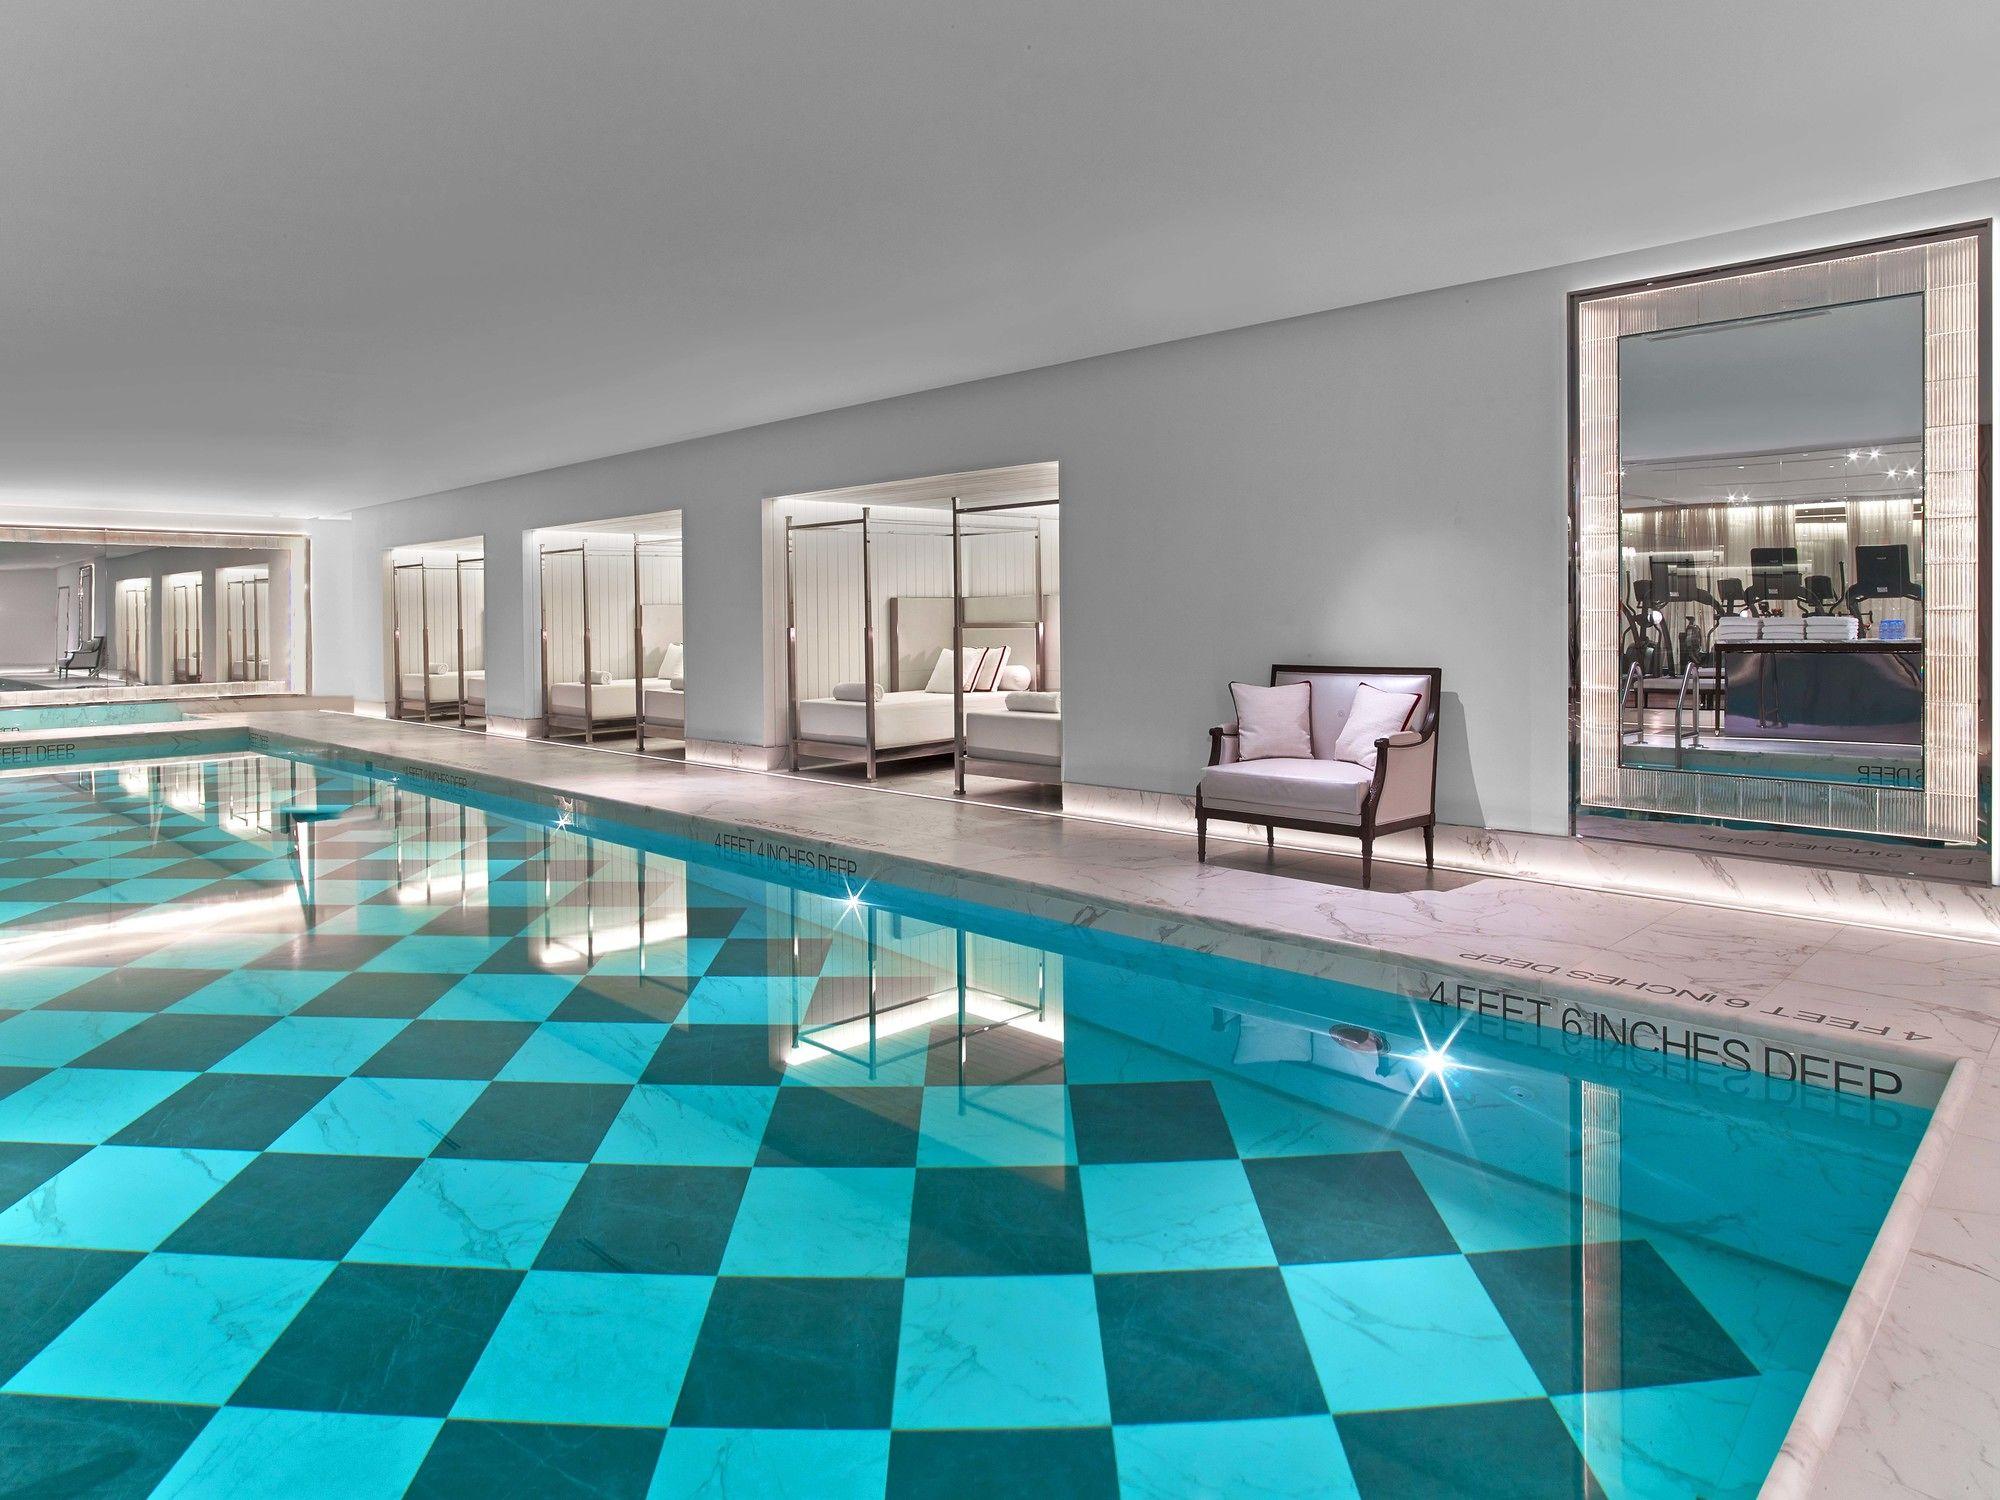 Pool view Baccarat Hotel and Residences New York